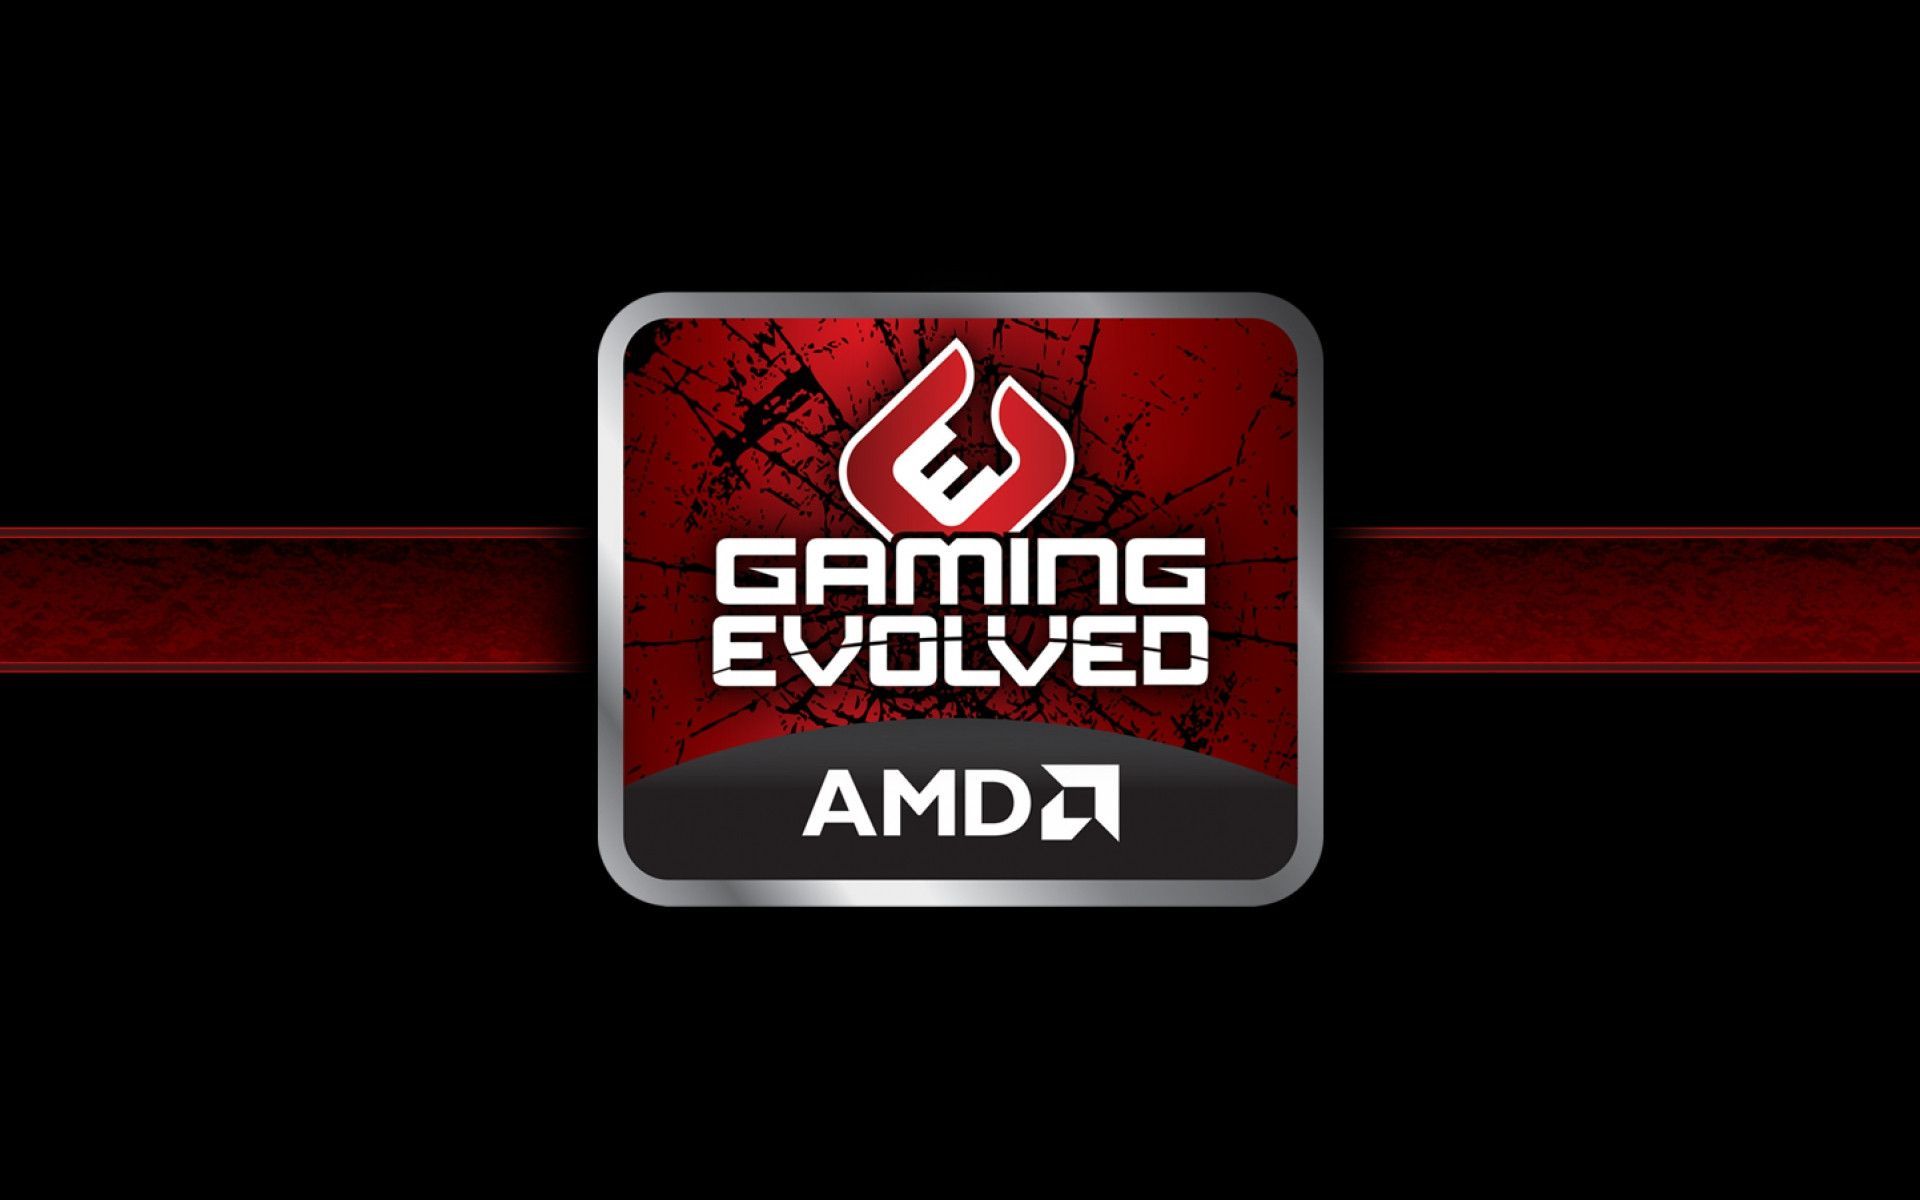 Amd Wallpapers 38 19 X 10